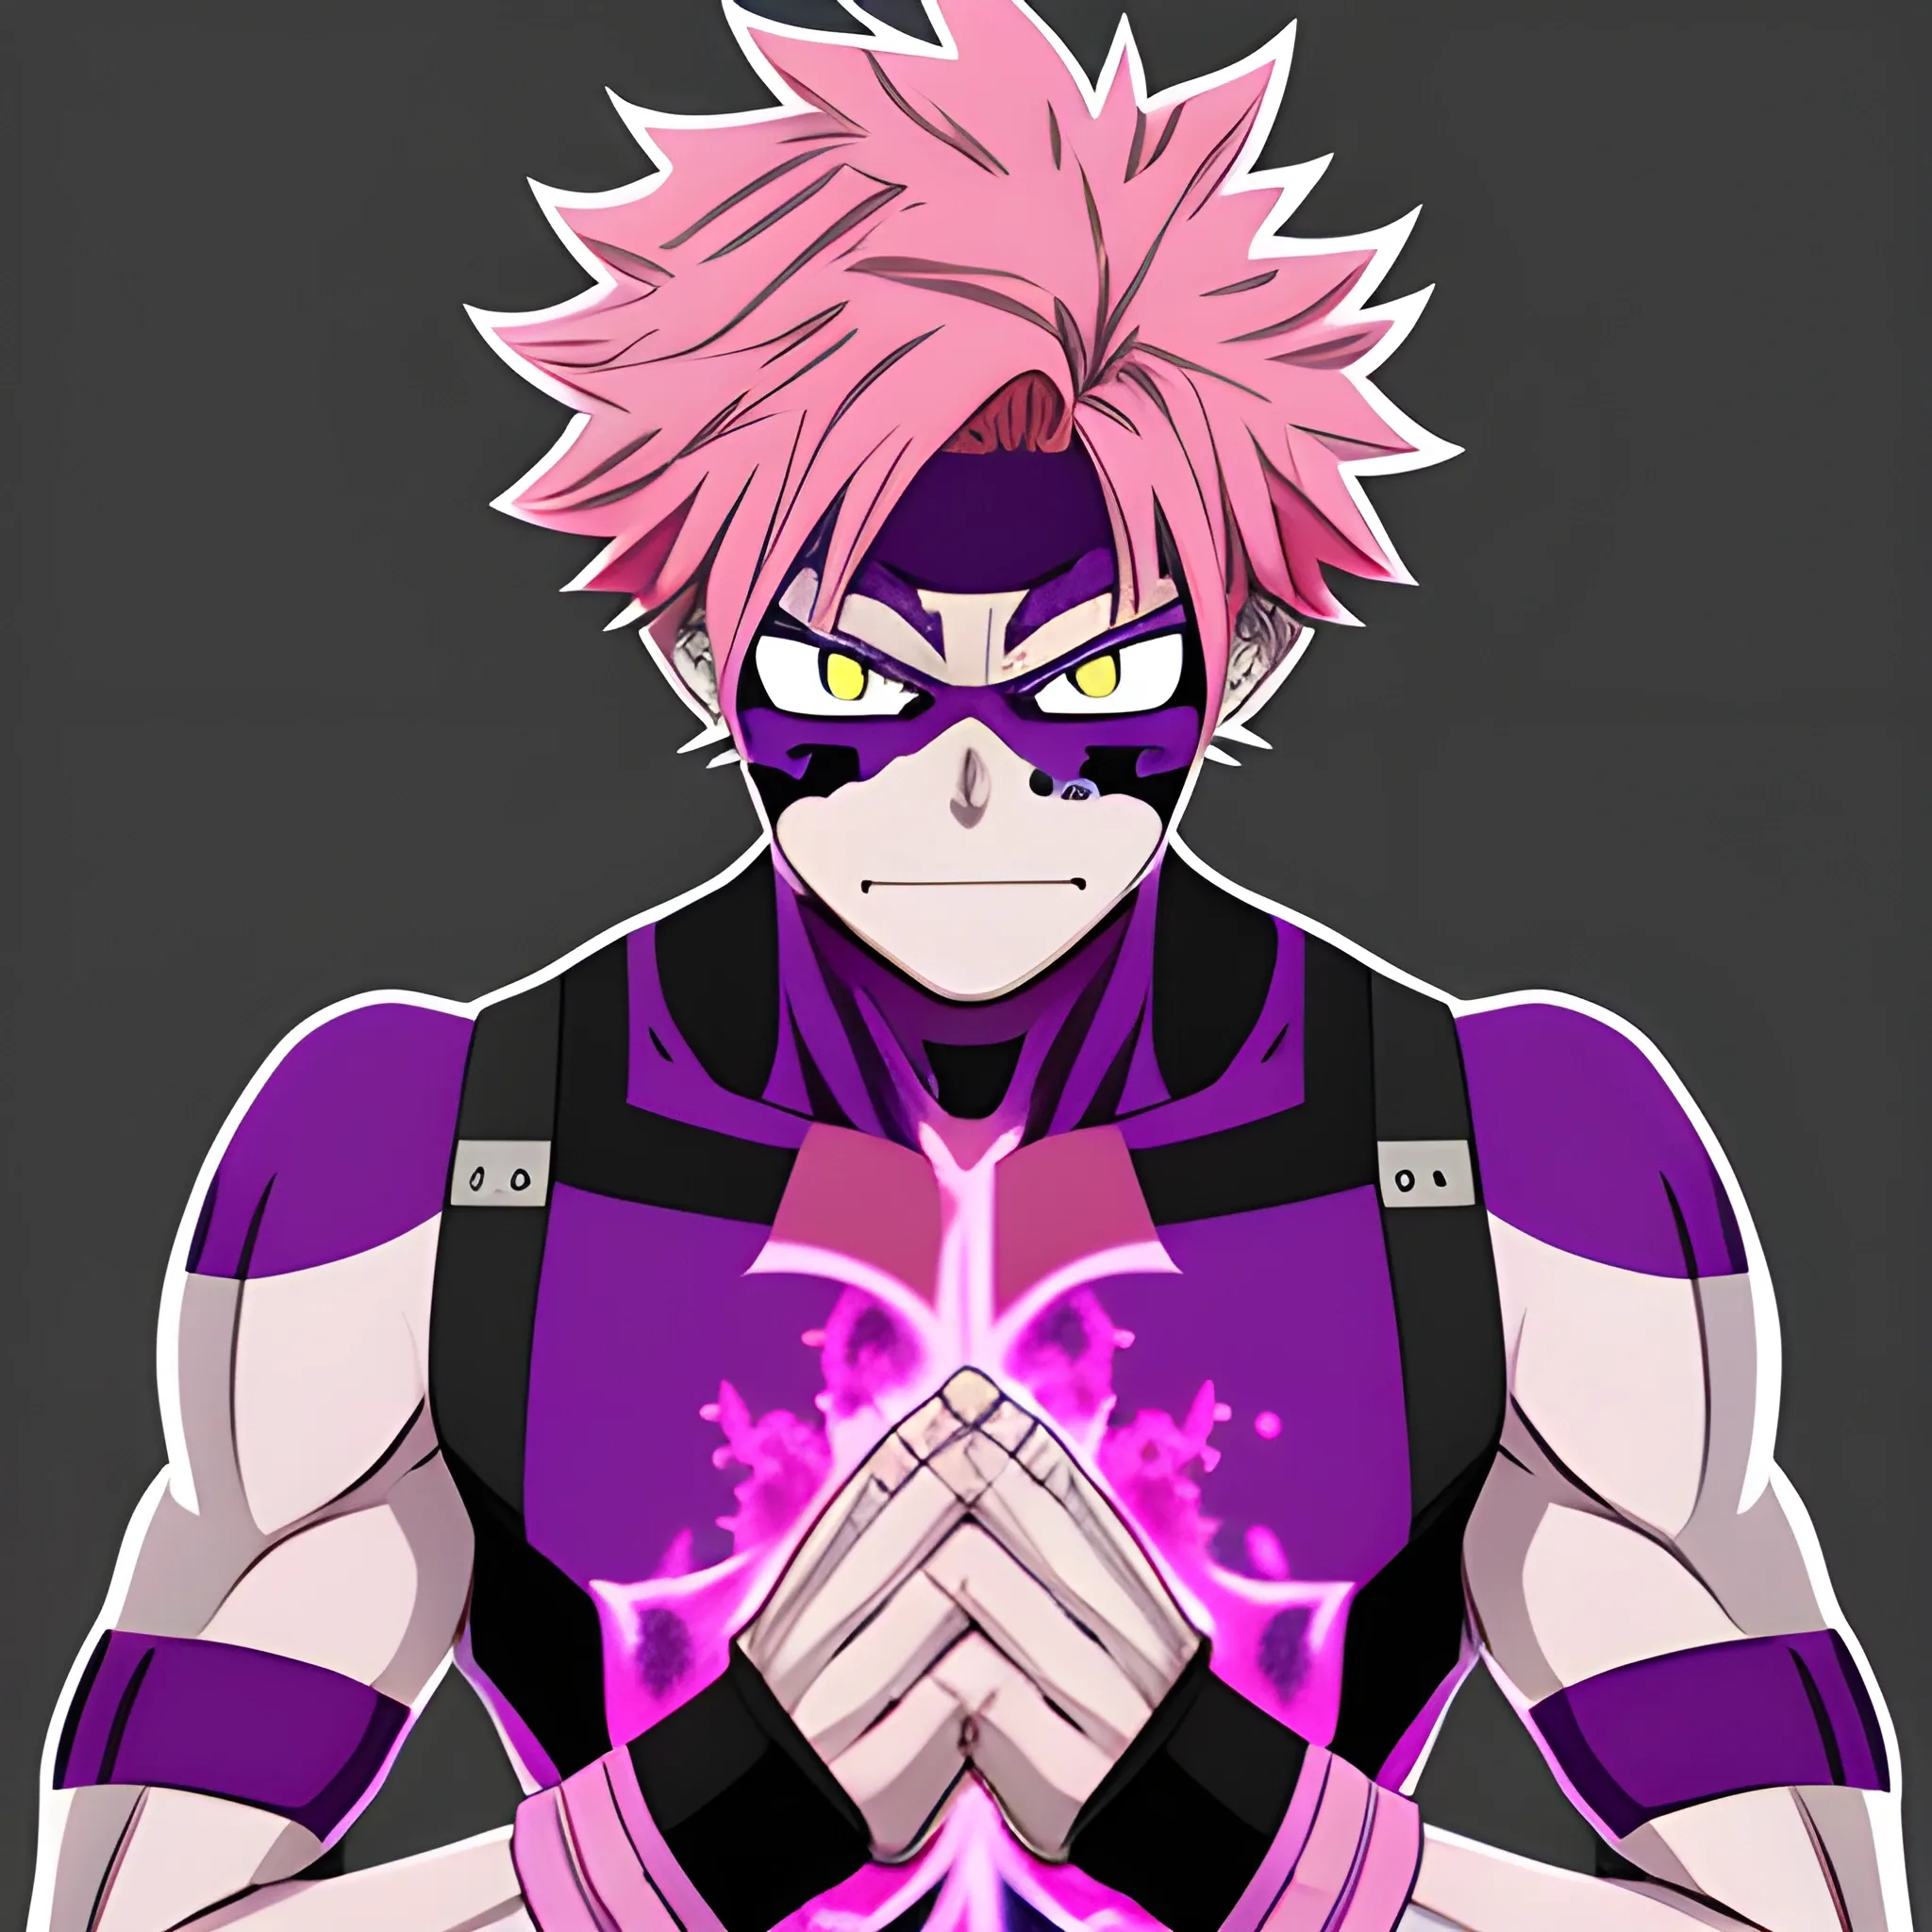 my hero academia male oc with Pink hair and purple eyes and bones coming out of hands hands looking melancholic